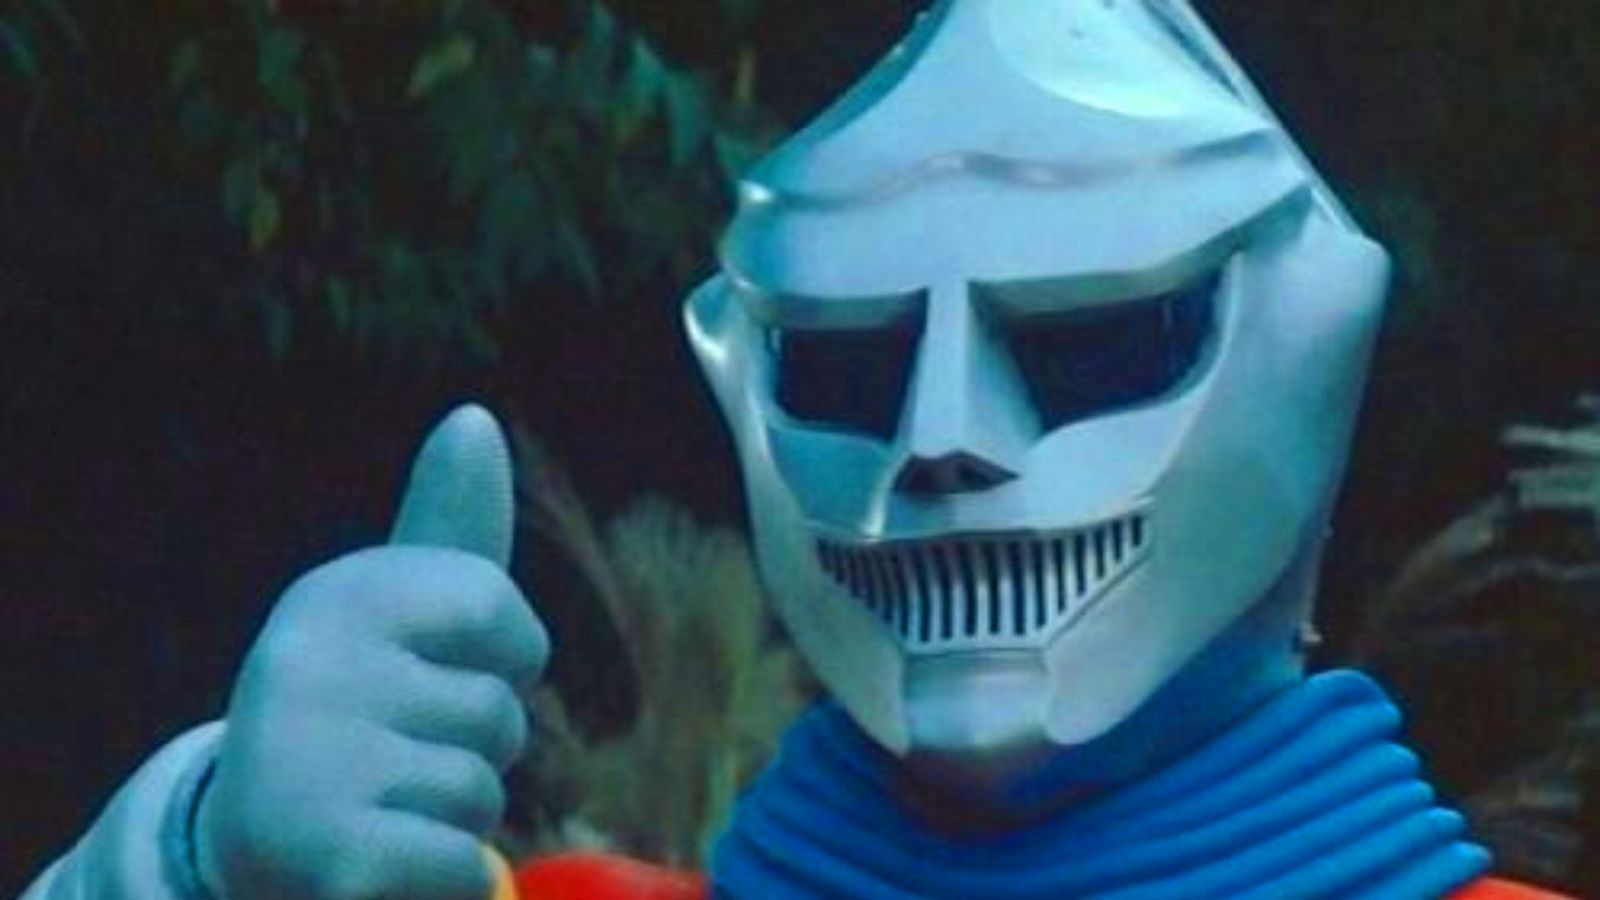 the best kaiju character ever: jet jaguar giving a thumbs up